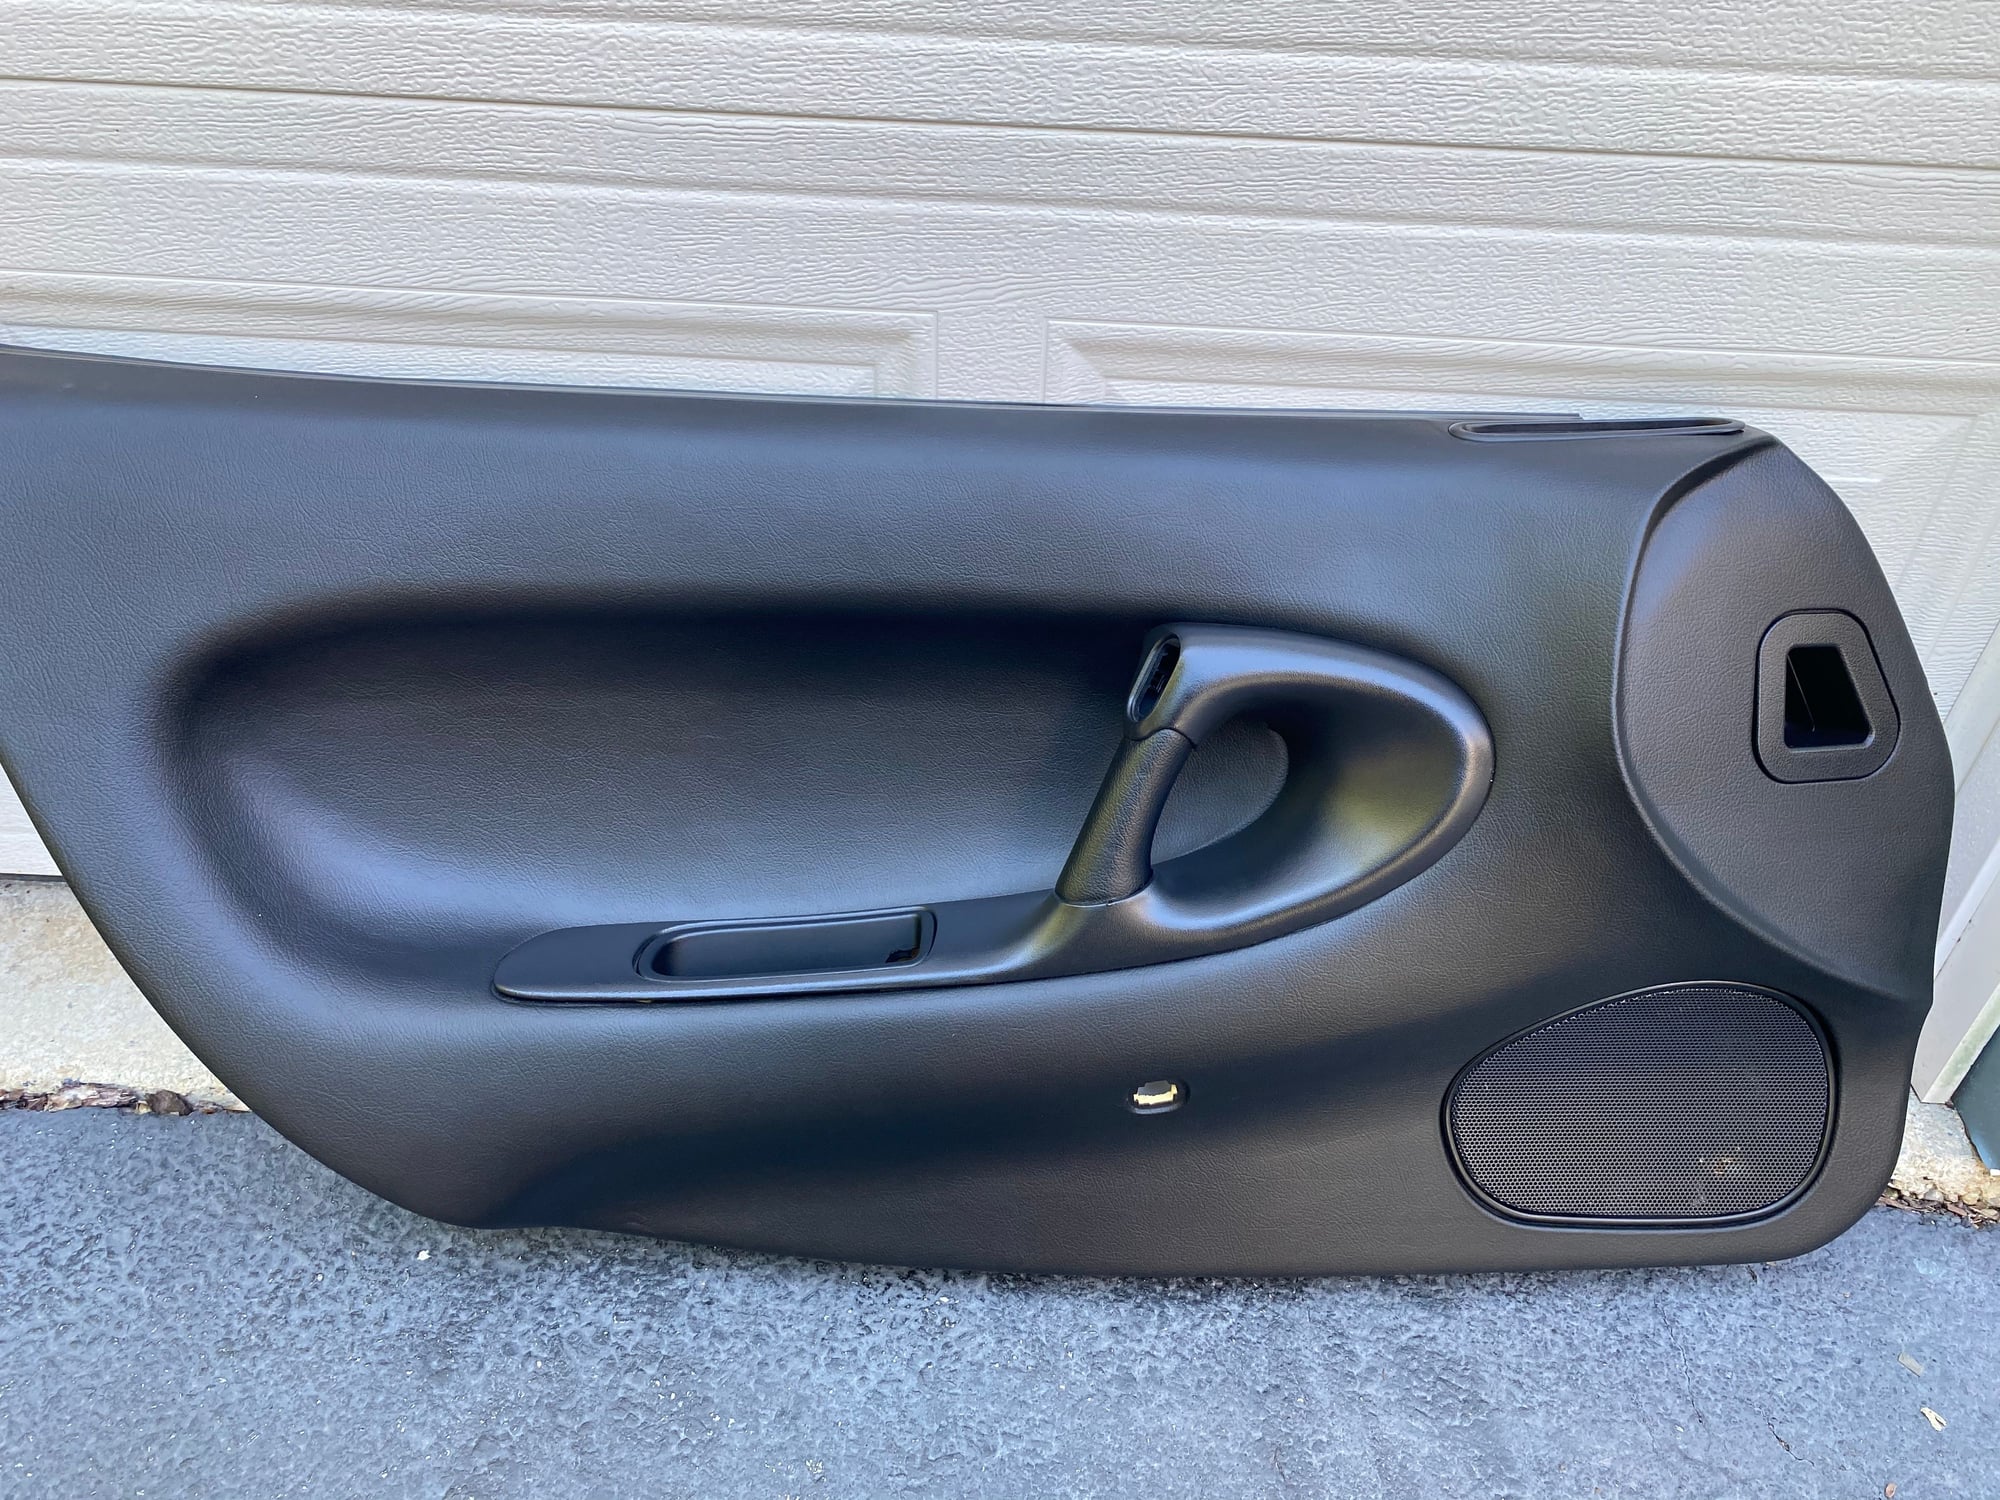 Interior/Upholstery - RHD RX-7 FD Door Panels! Excellent Shape! - Used - 1992 to 2002 Mazda RX-7 - Prince Frederick, MD 20678, United States